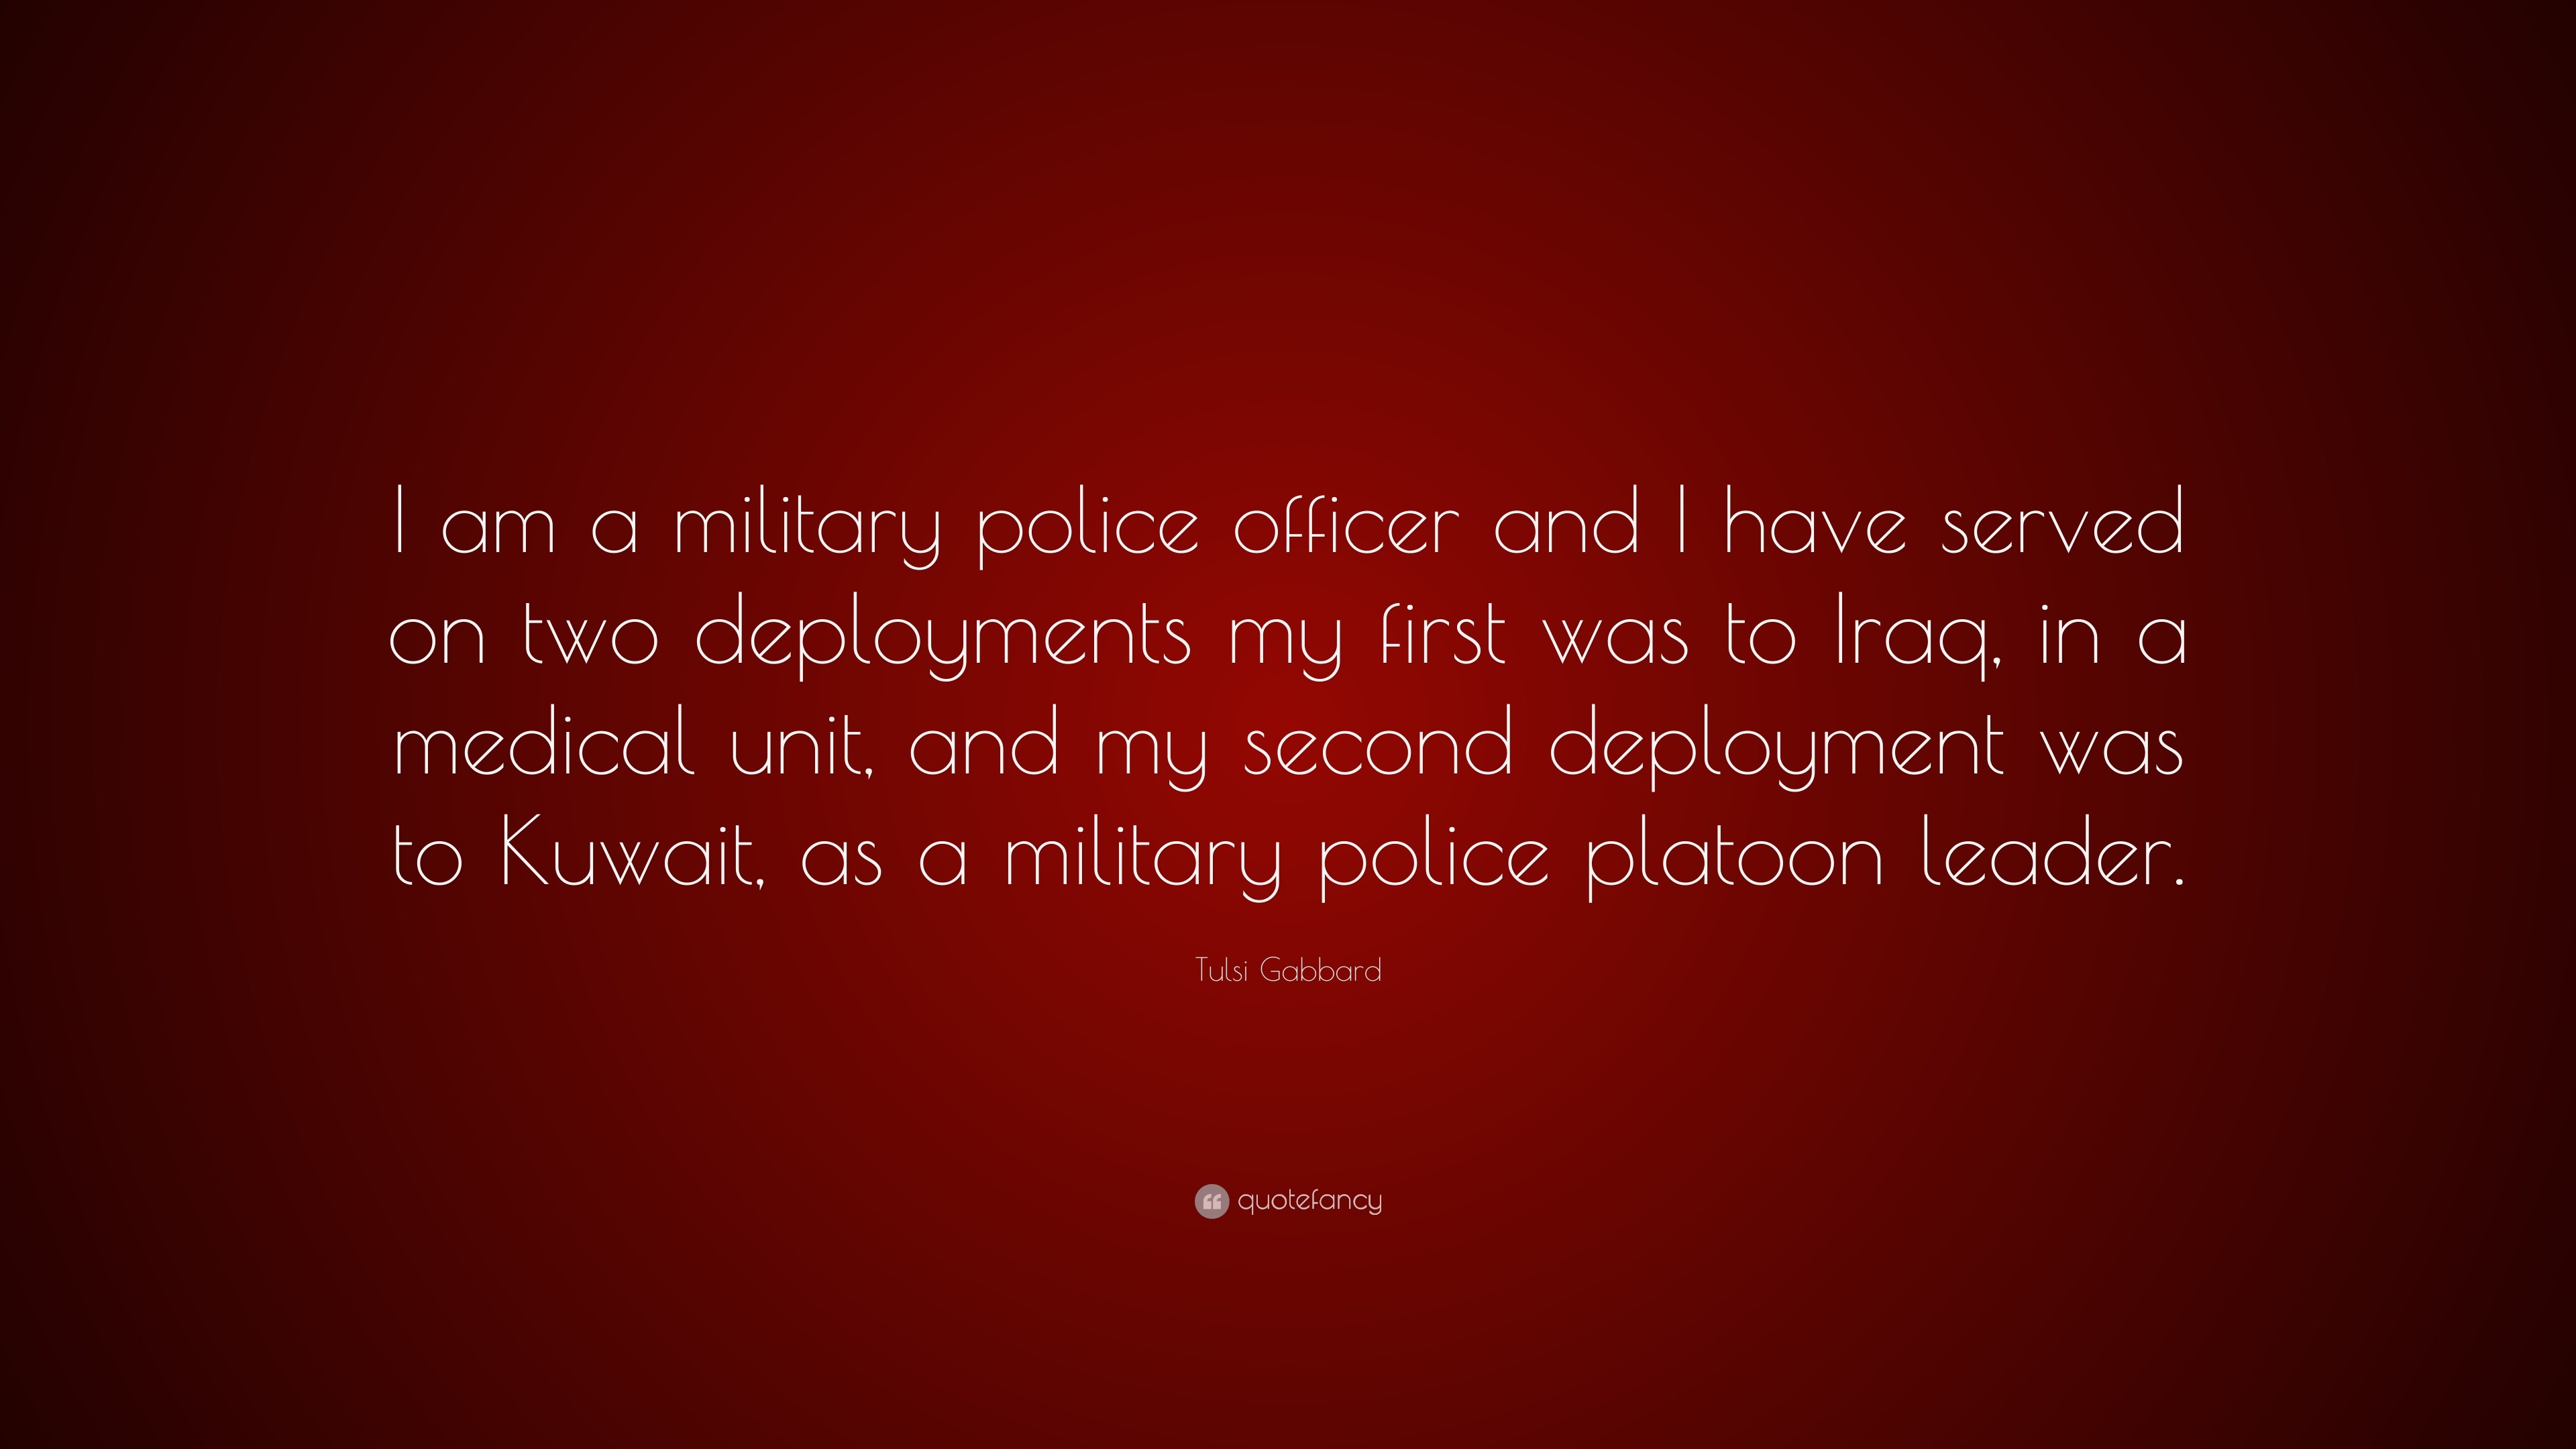 3840x2160 Tulsi Gabbard Quote: “I am a military police officer and I have served on